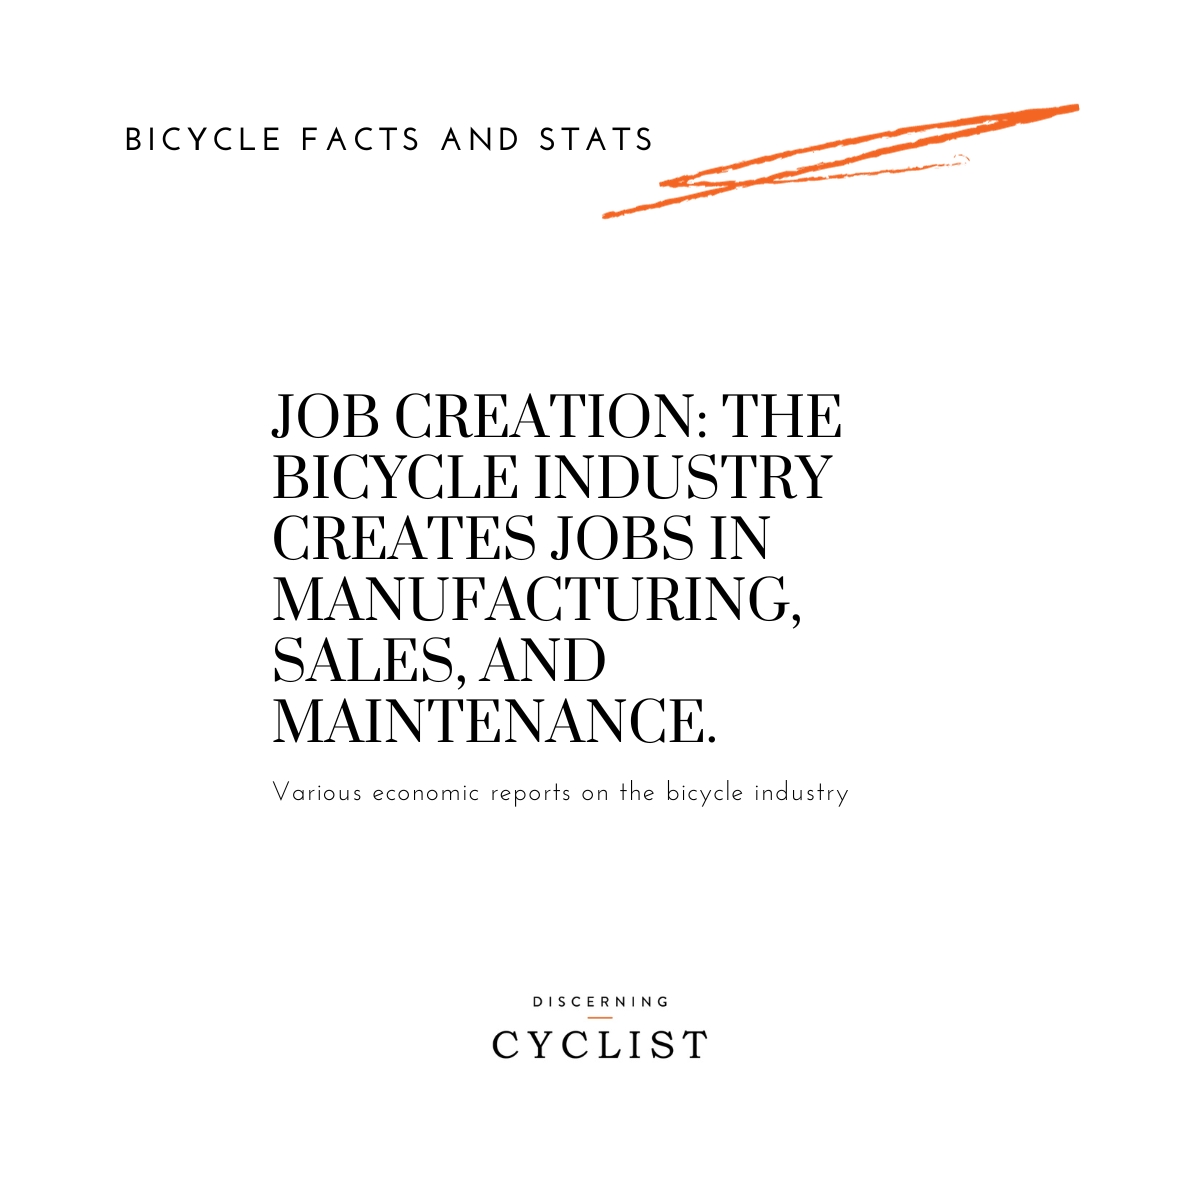 Job Creation: The bicycle industry creates jobs in manufacturing, sales, and maintenance.